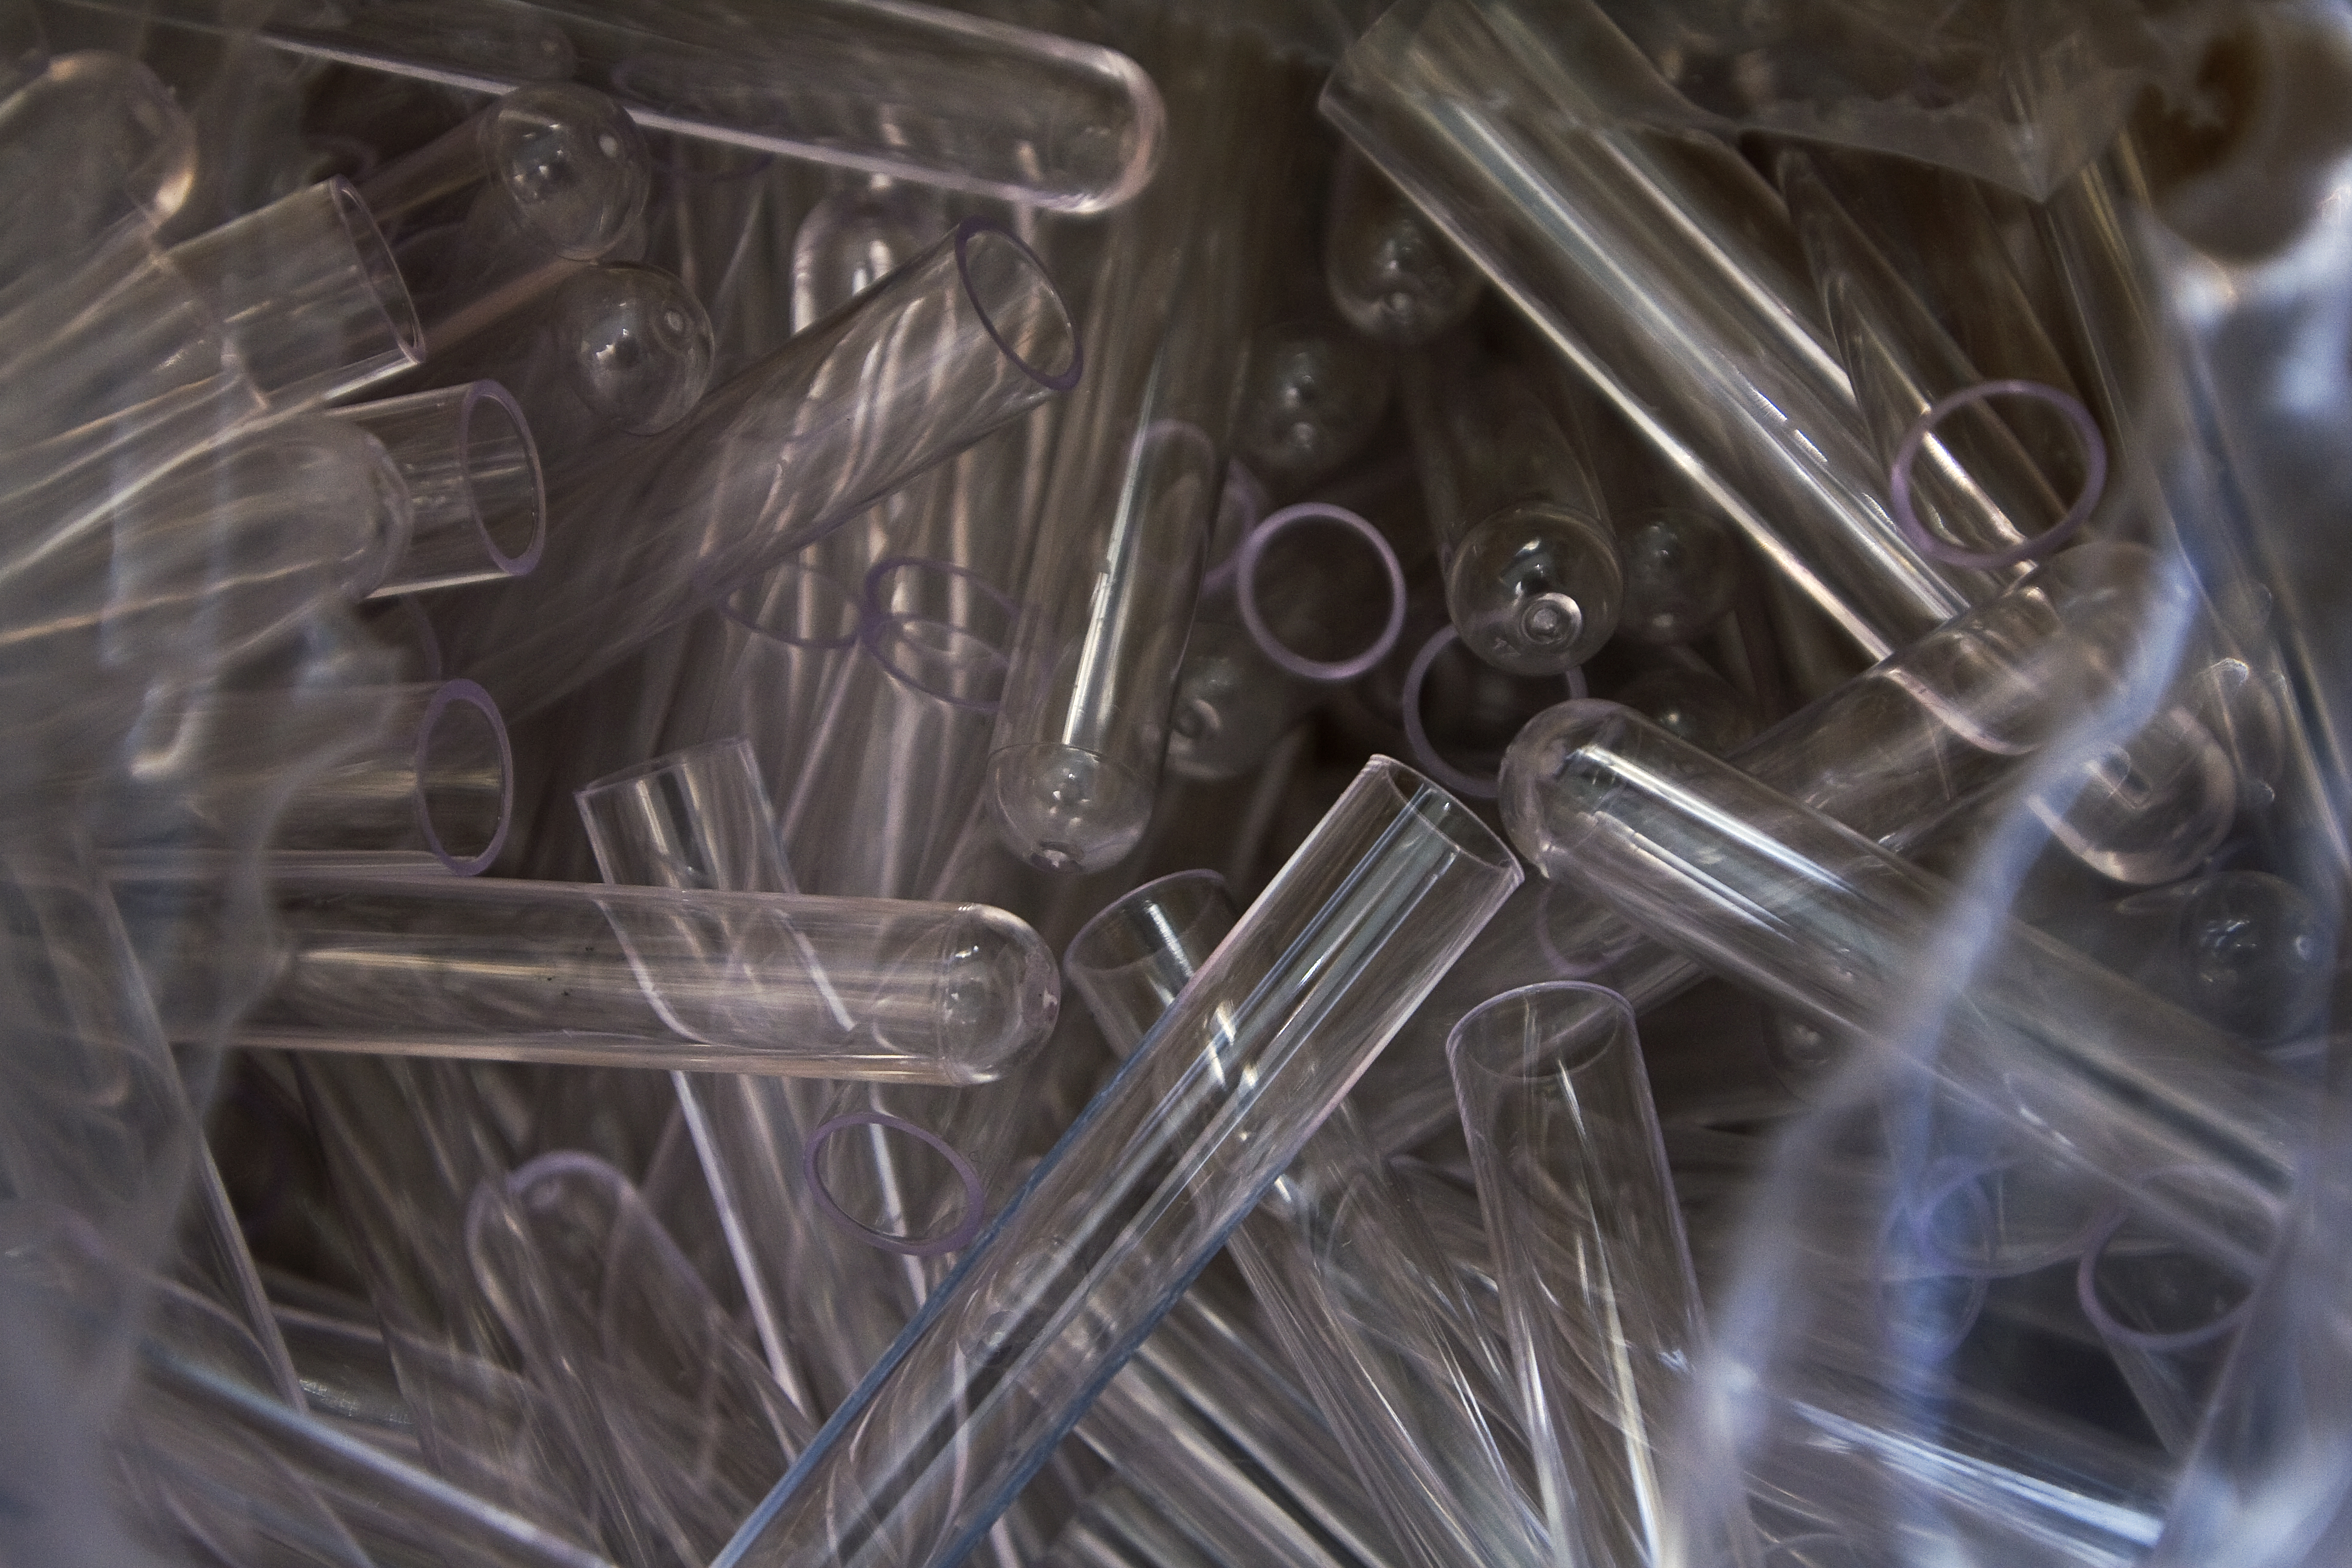 Pile of test tubes.